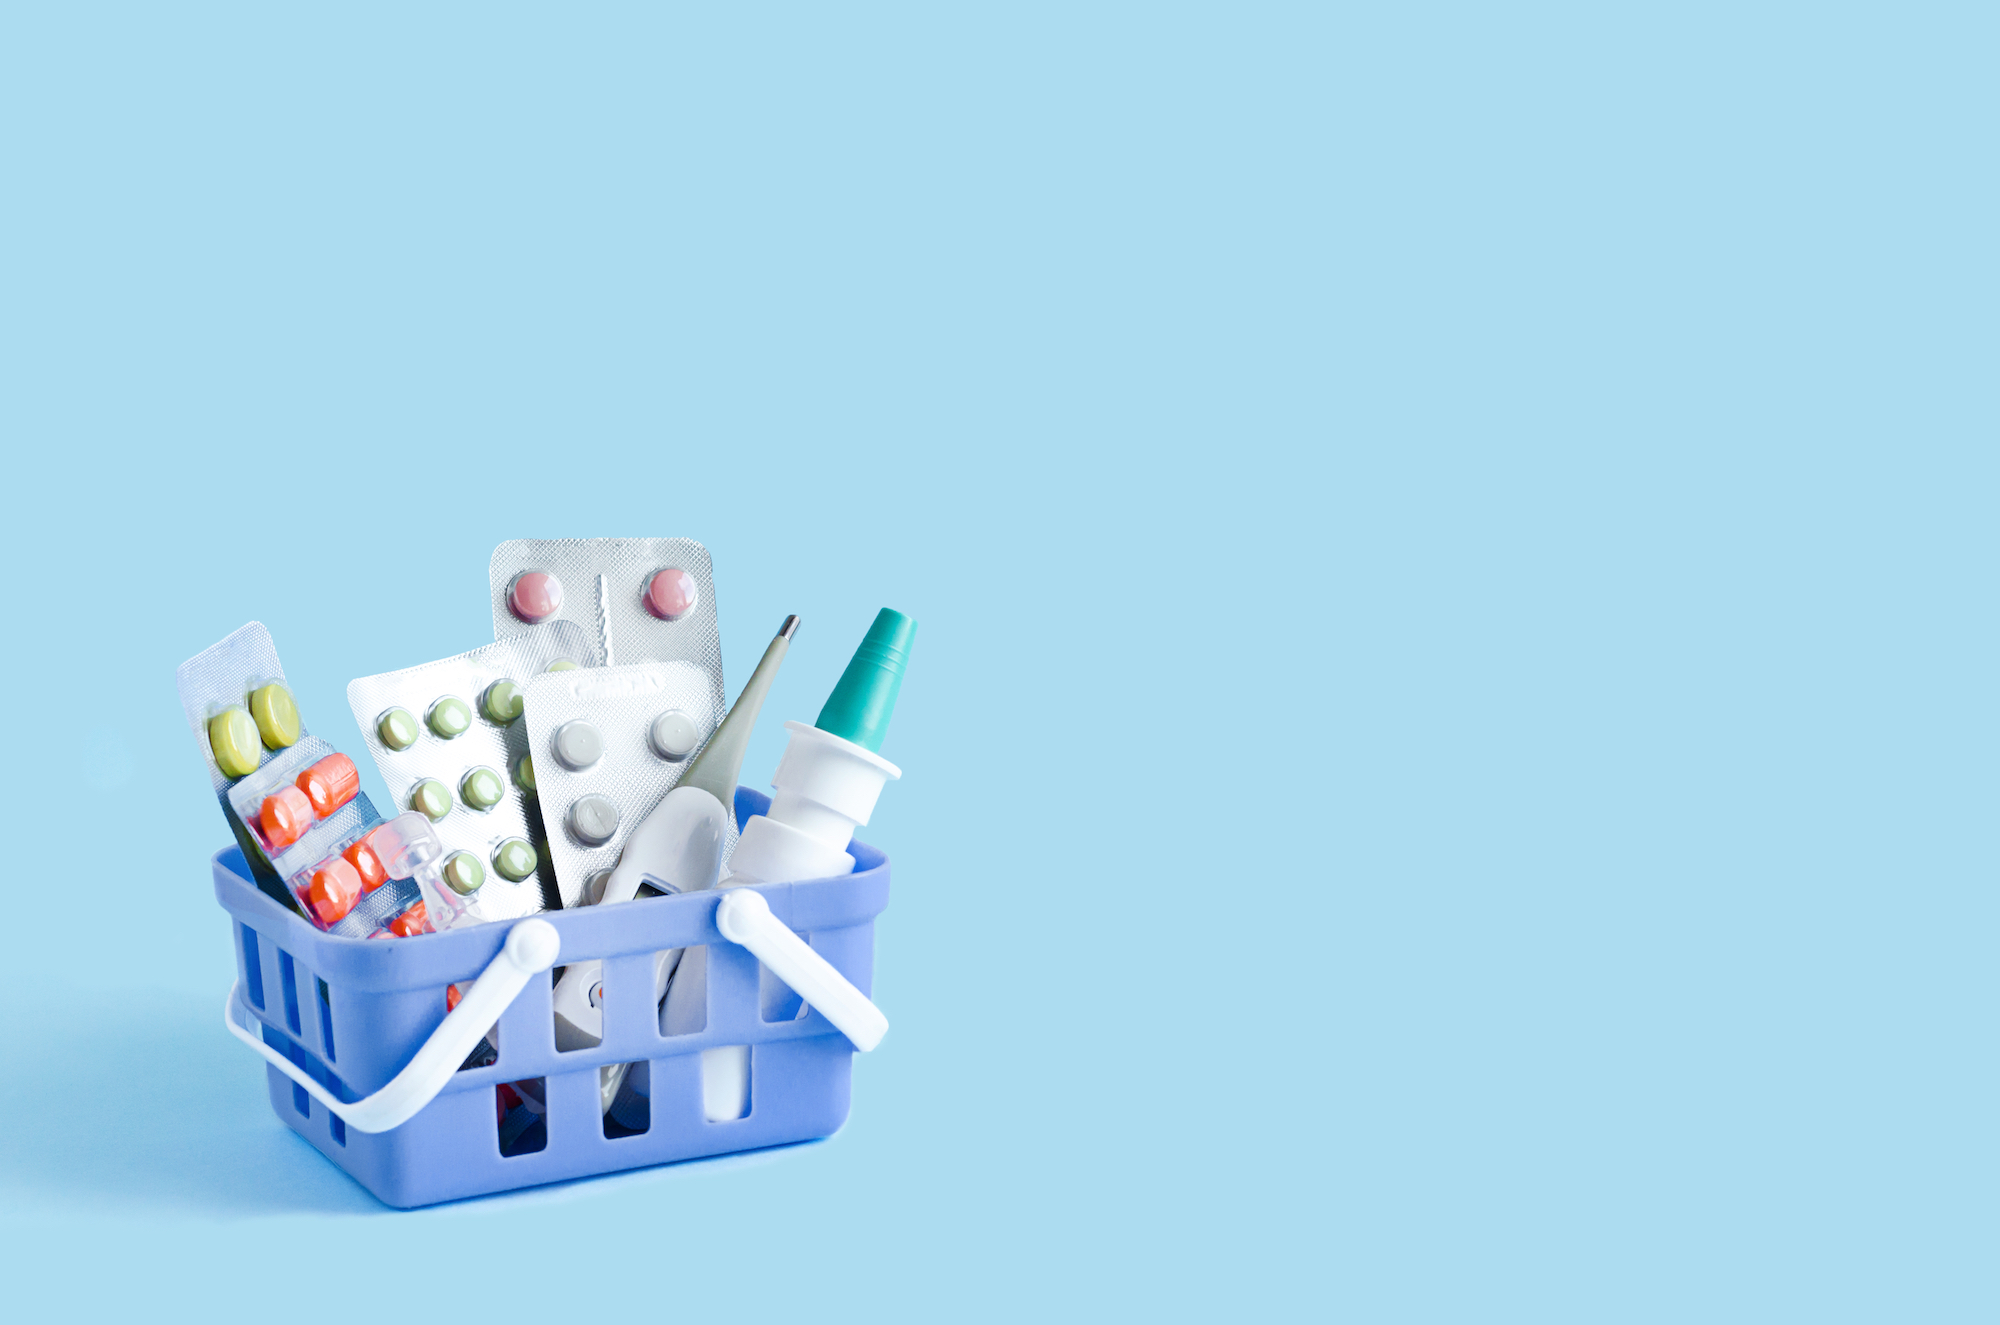 An image depicting medication is shown.